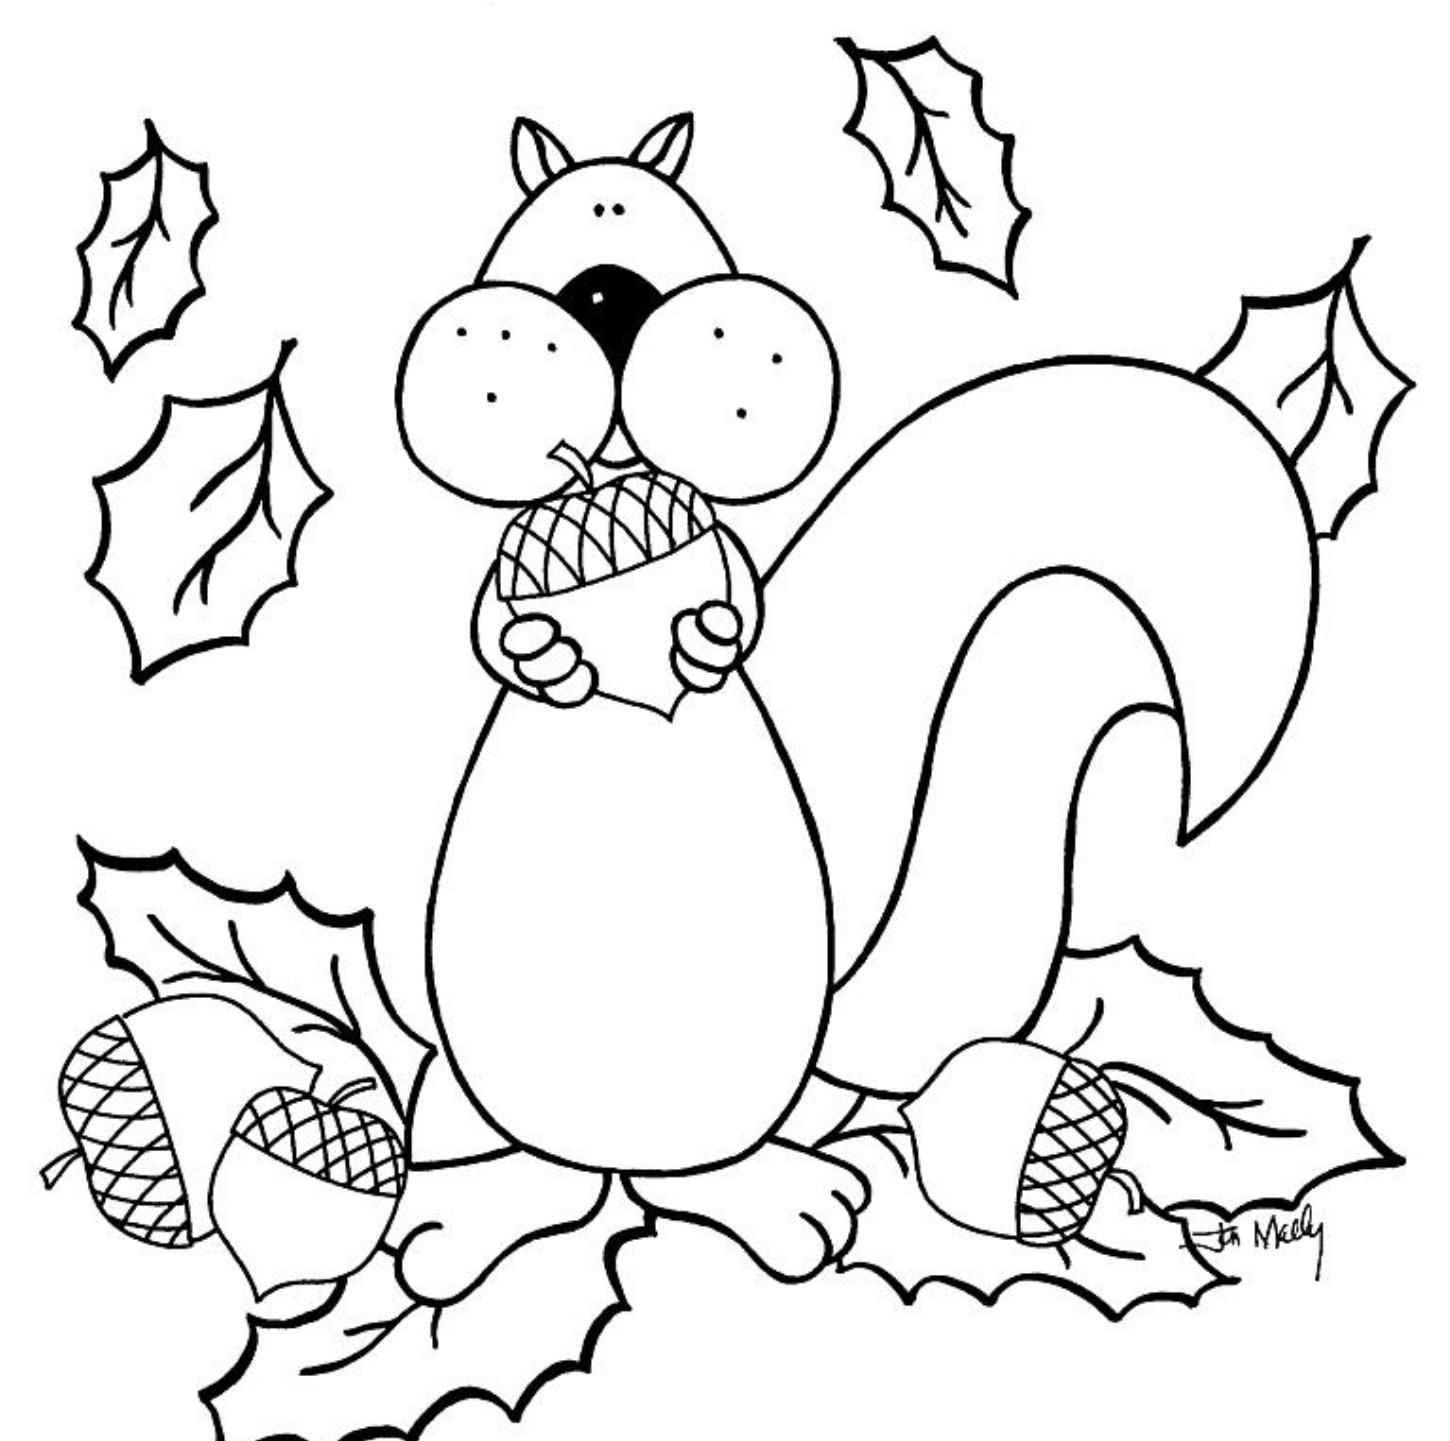 Preschool Squirrel Coloring Pages With | Animal Coloring pages of ...